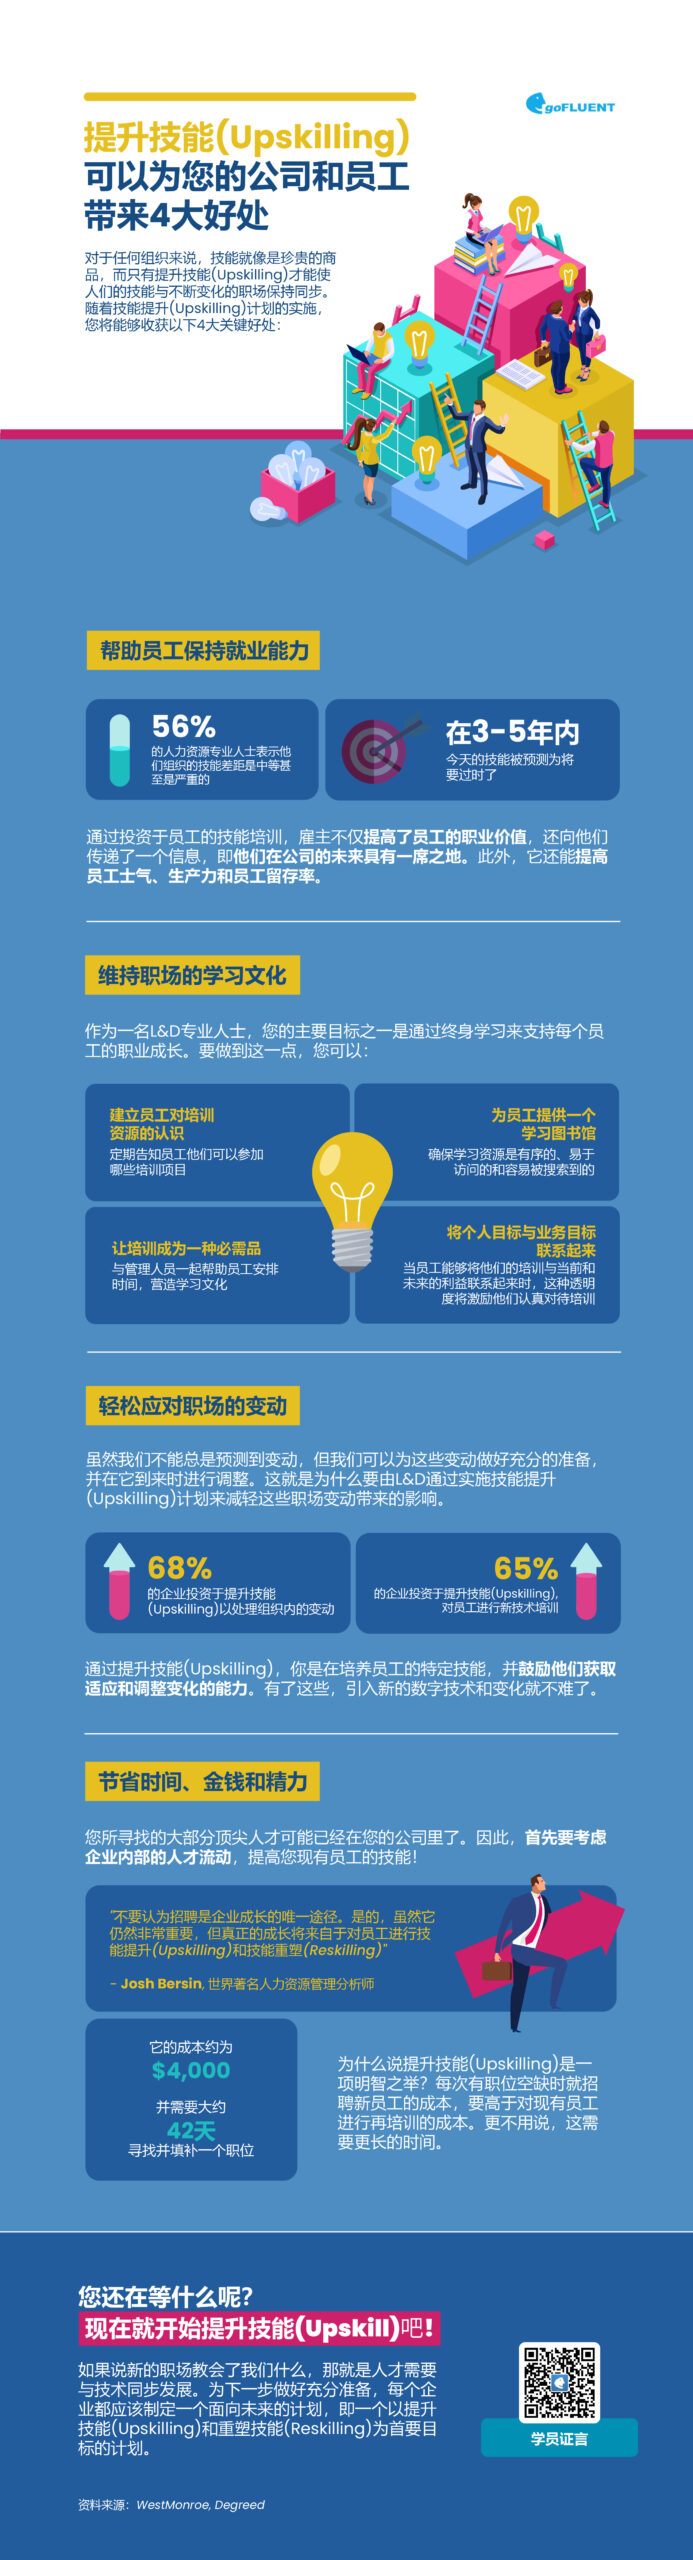 4-Ways-Upskilling-Benefits-Your-Company-and-Workforce_CN_Infographic-scaled